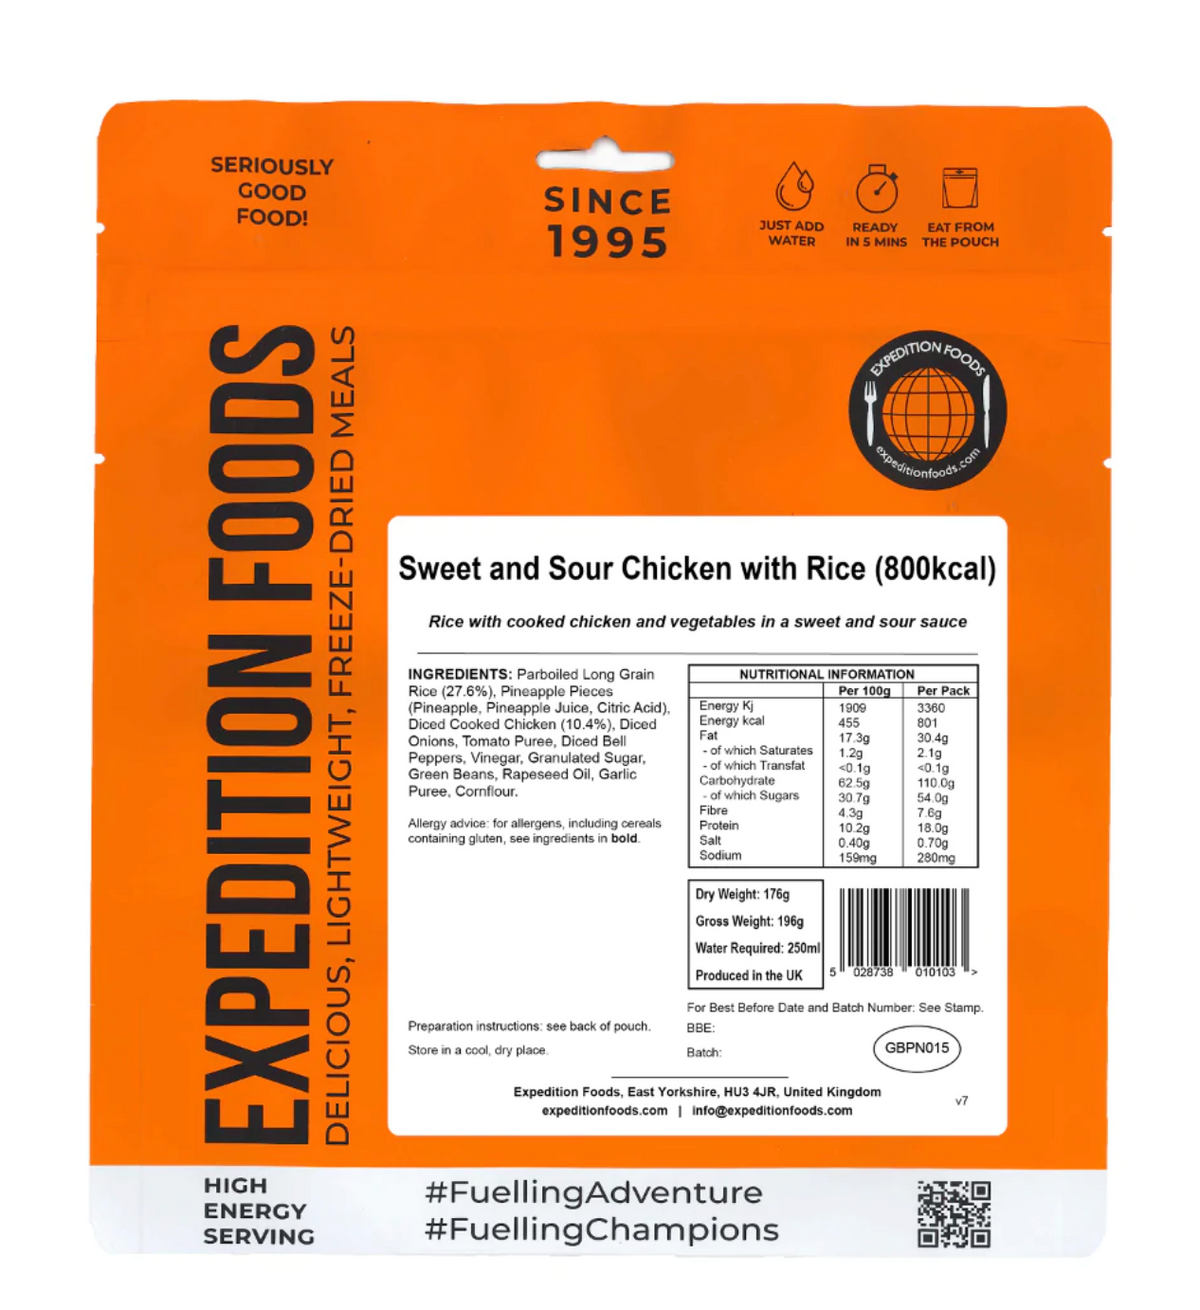 Expedition Foods Sweet and Sour Chicken with Rice 800KCAL